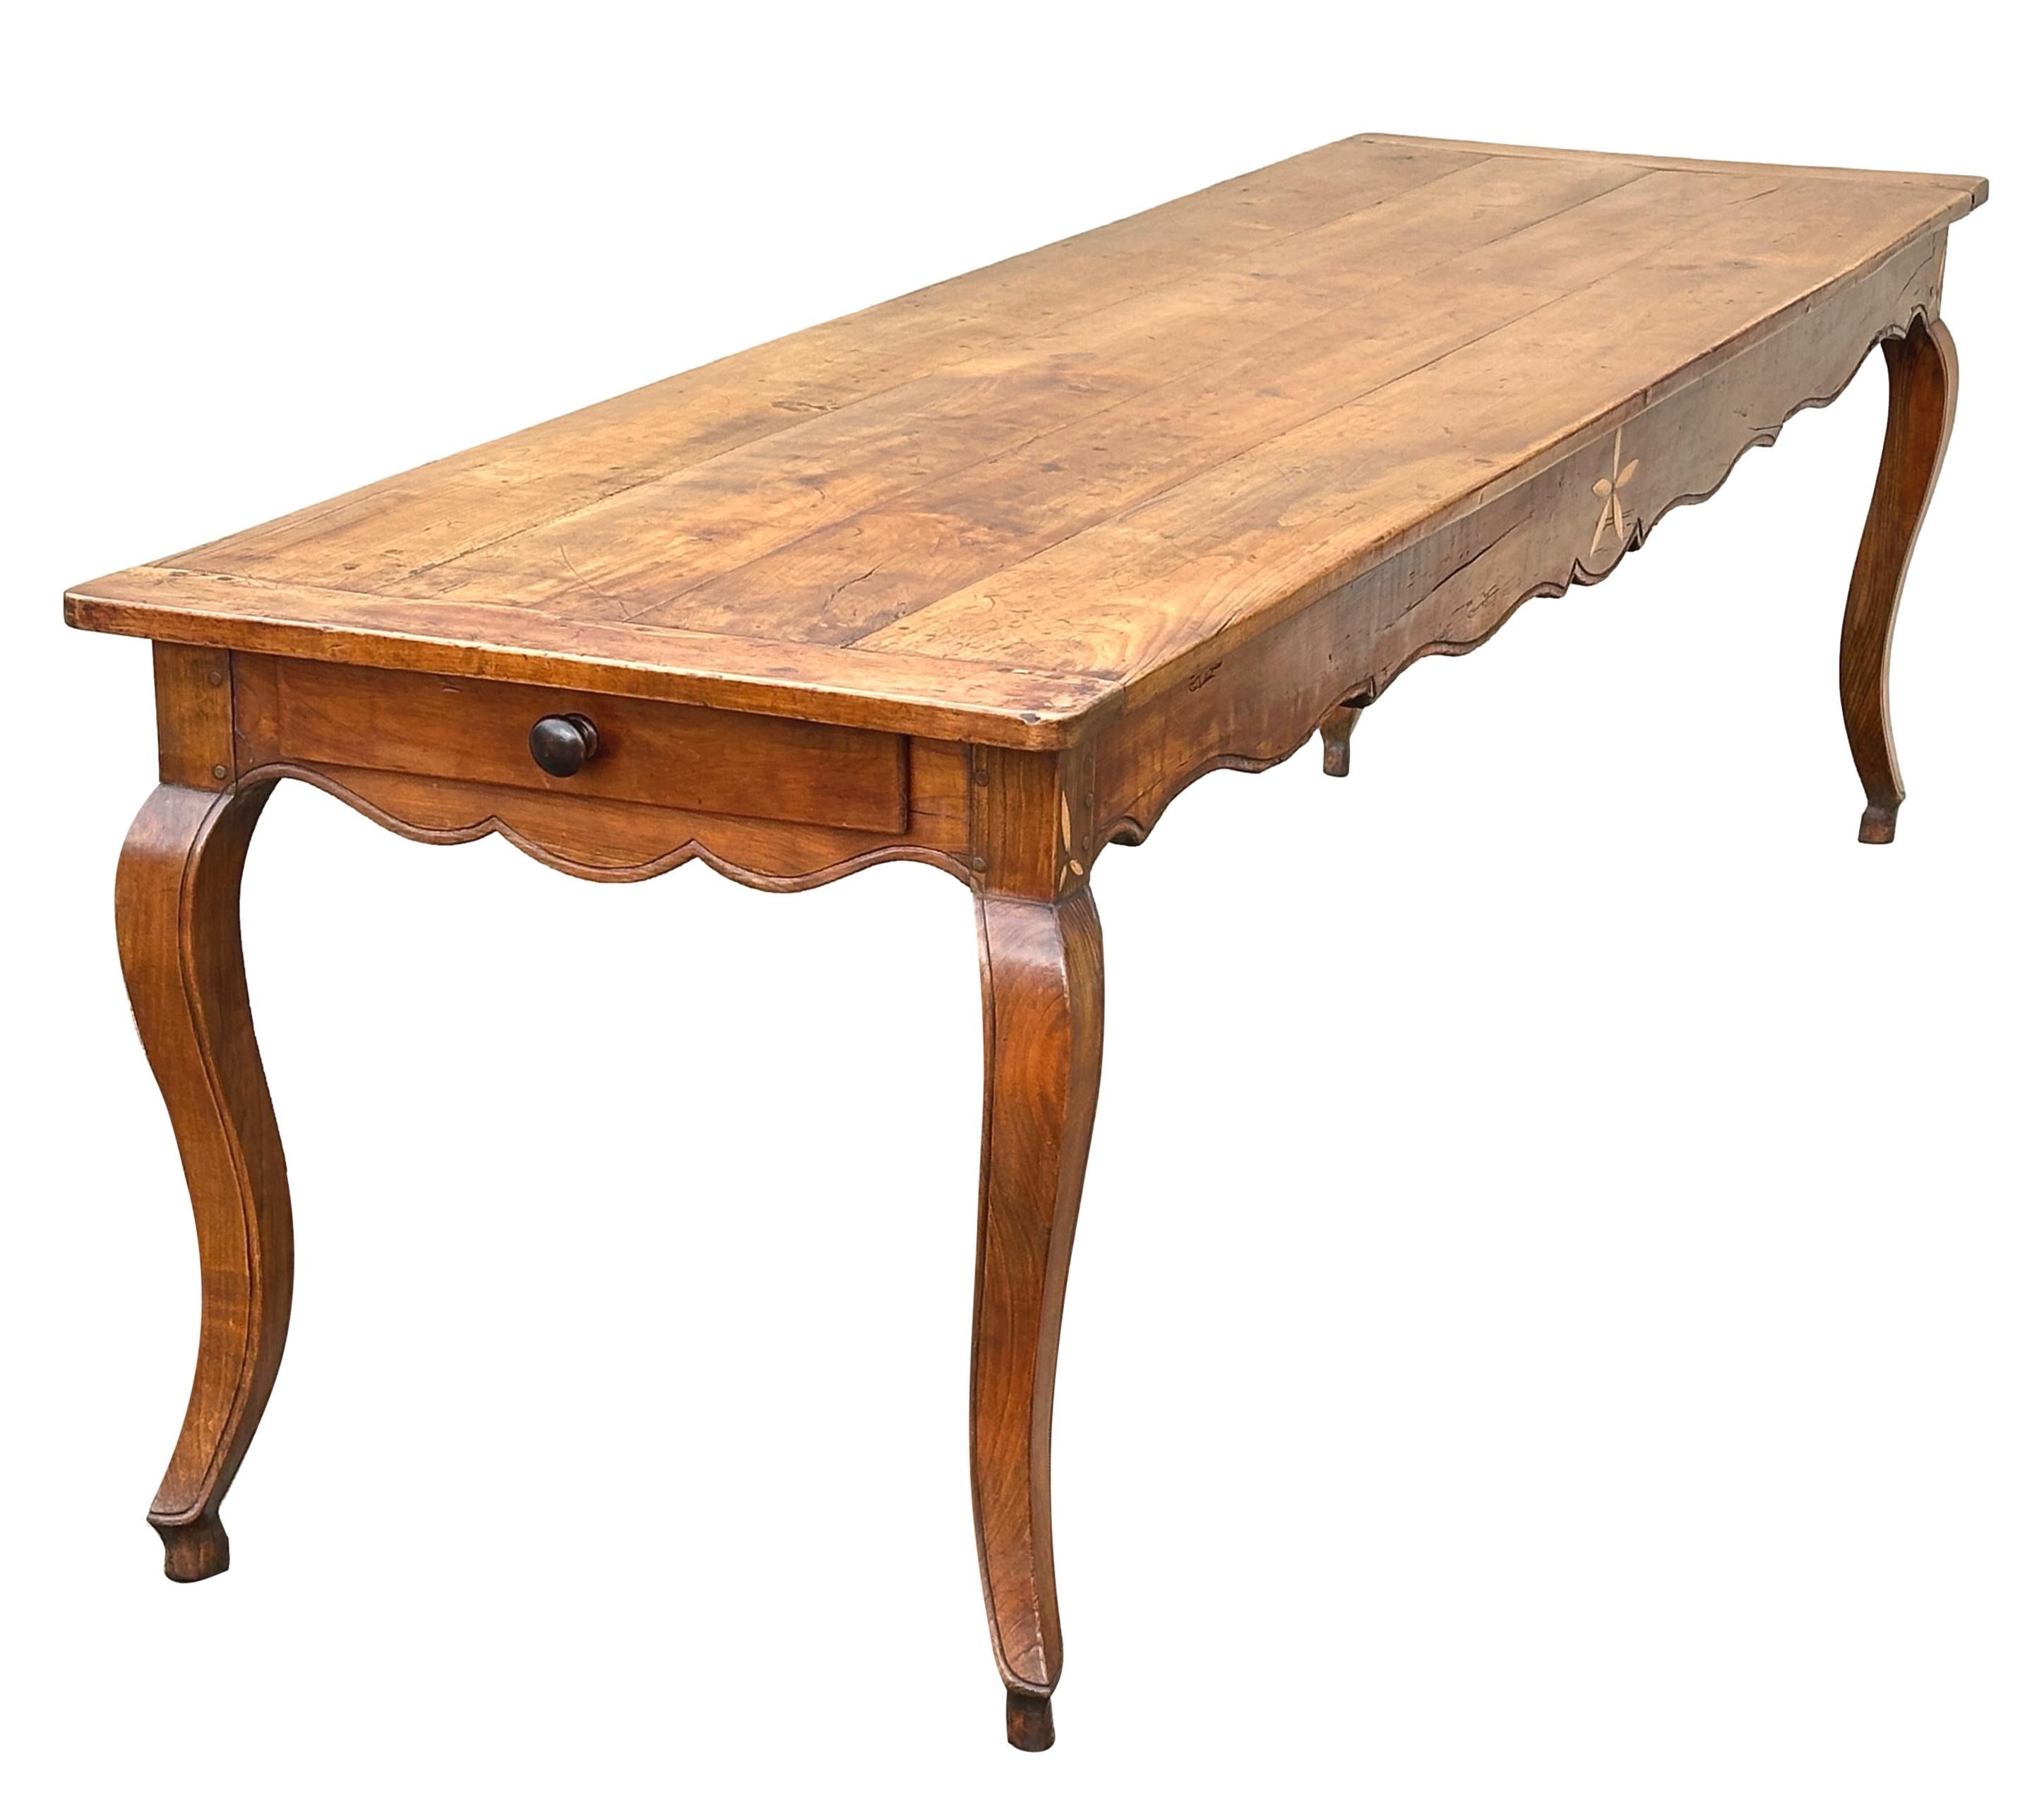 French Provincial Large Early 19th Century French Cherry Wood Farmhouse Kitchen Table For Sale